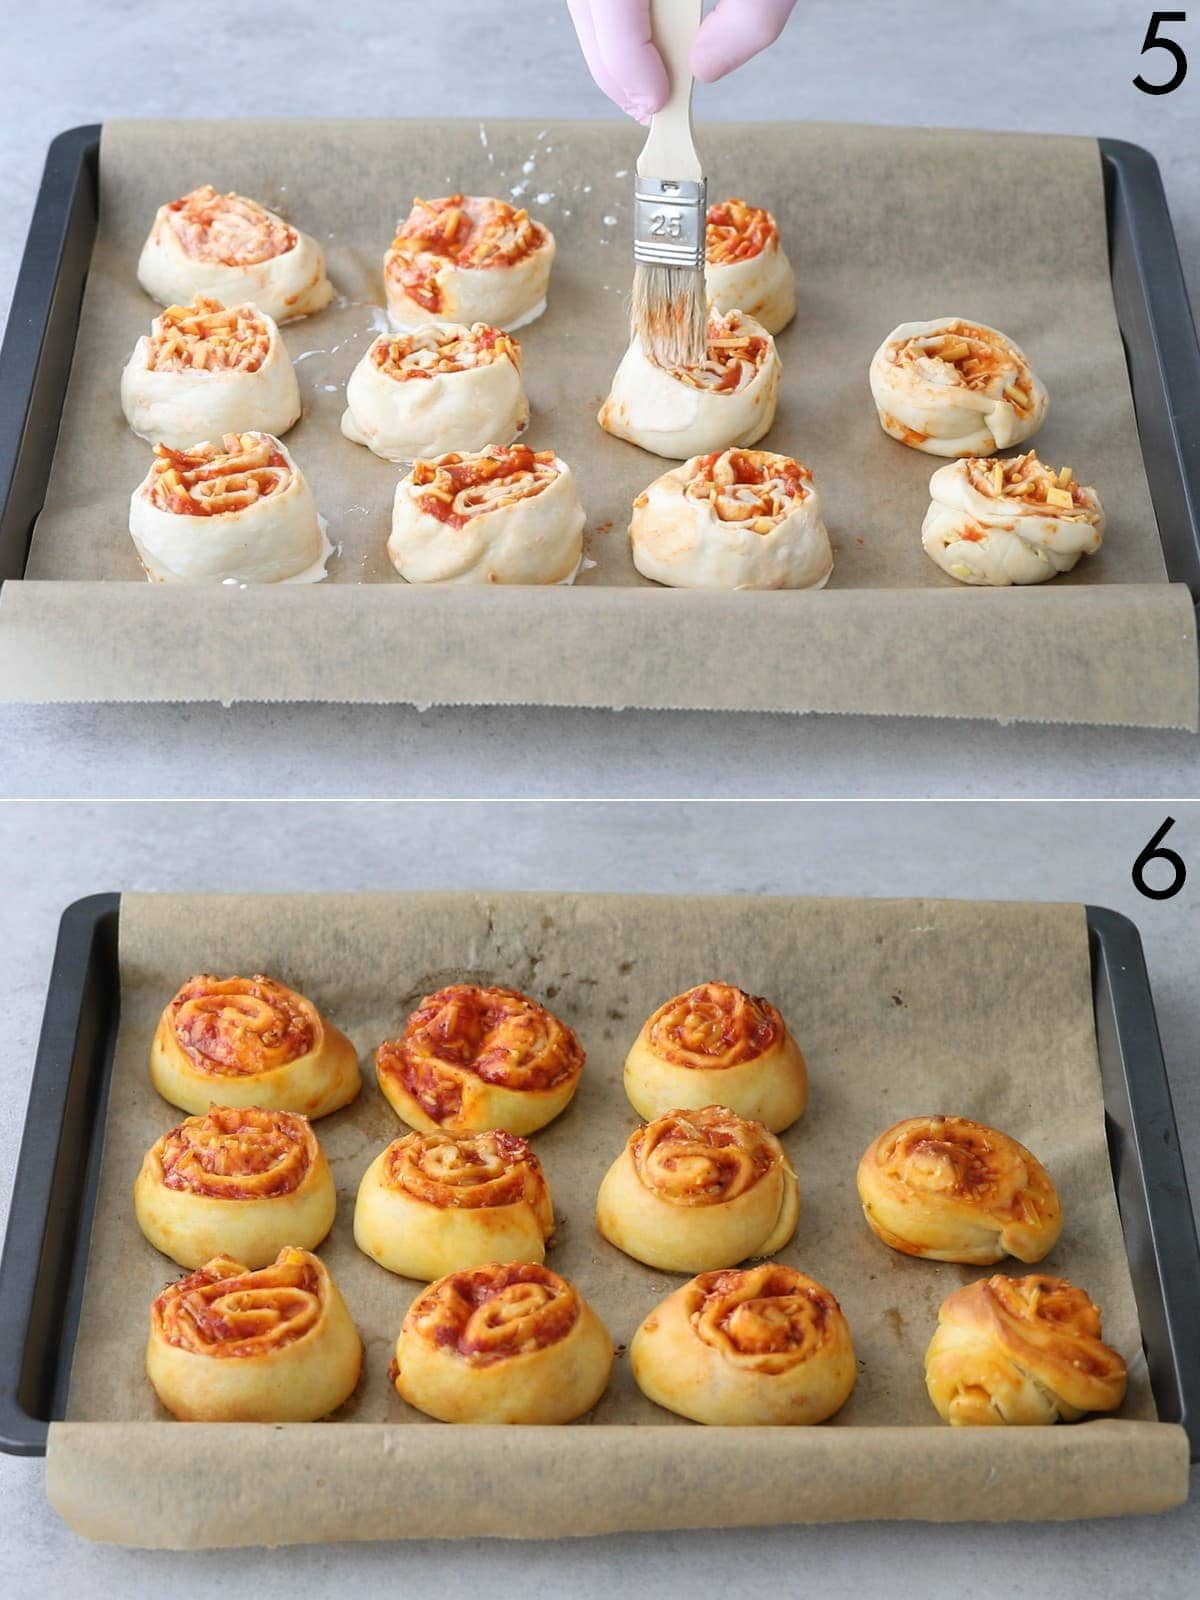 Tomato pizza rolls on a baking tray before and after baking